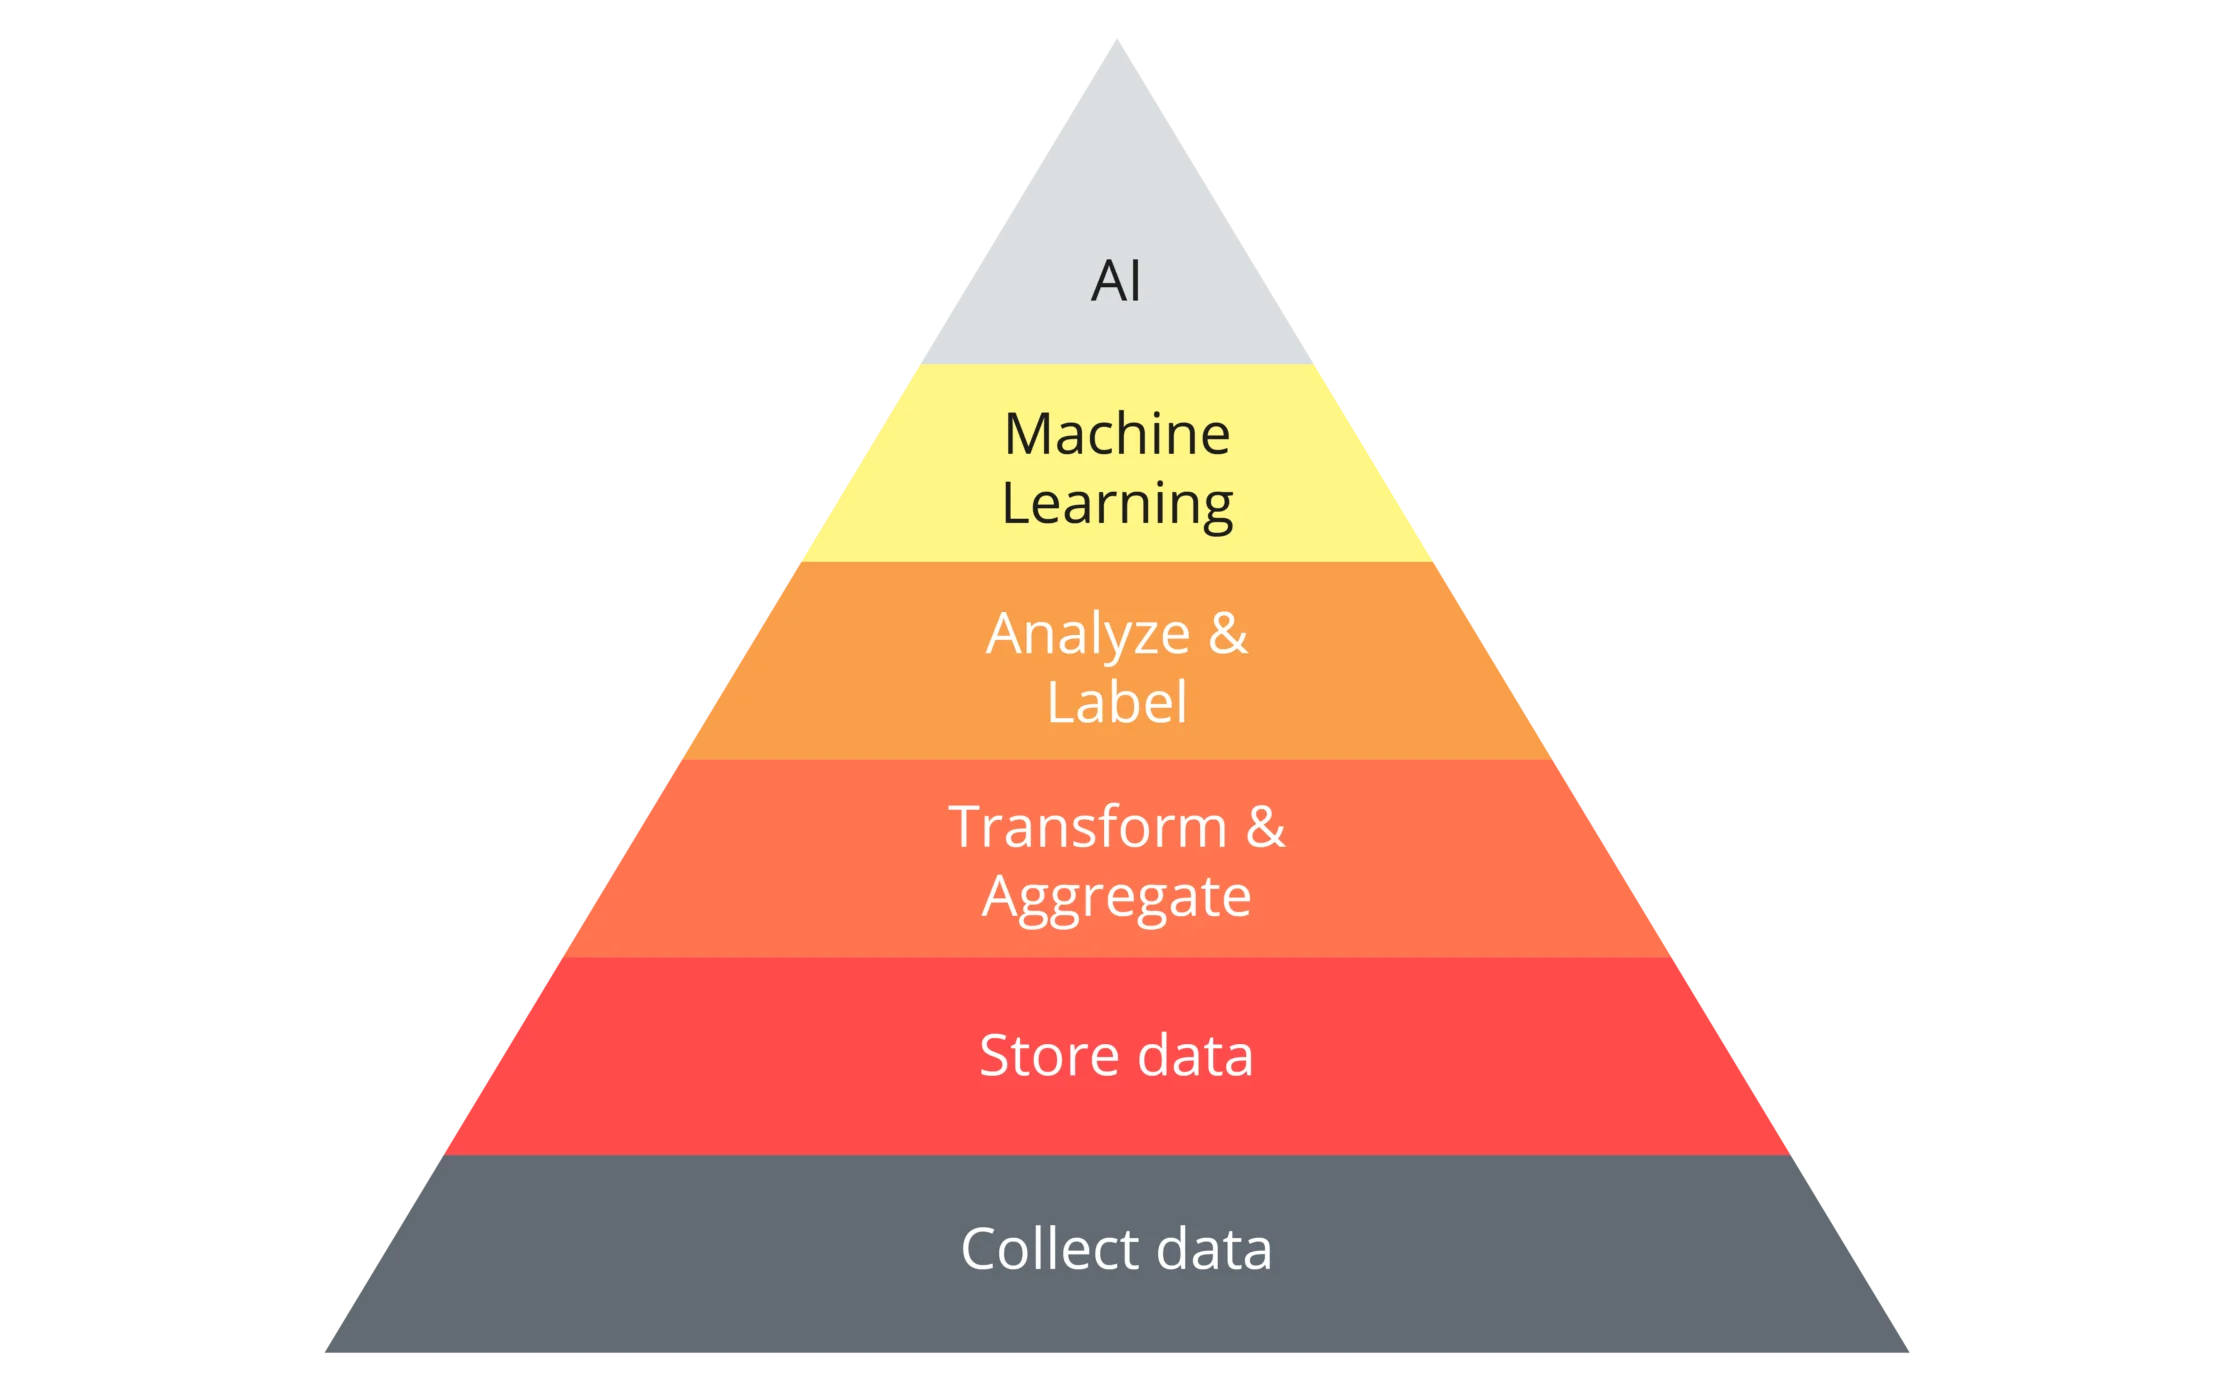 This diagram shows the Data Science hierarchy of needs in the form of a pyramid.